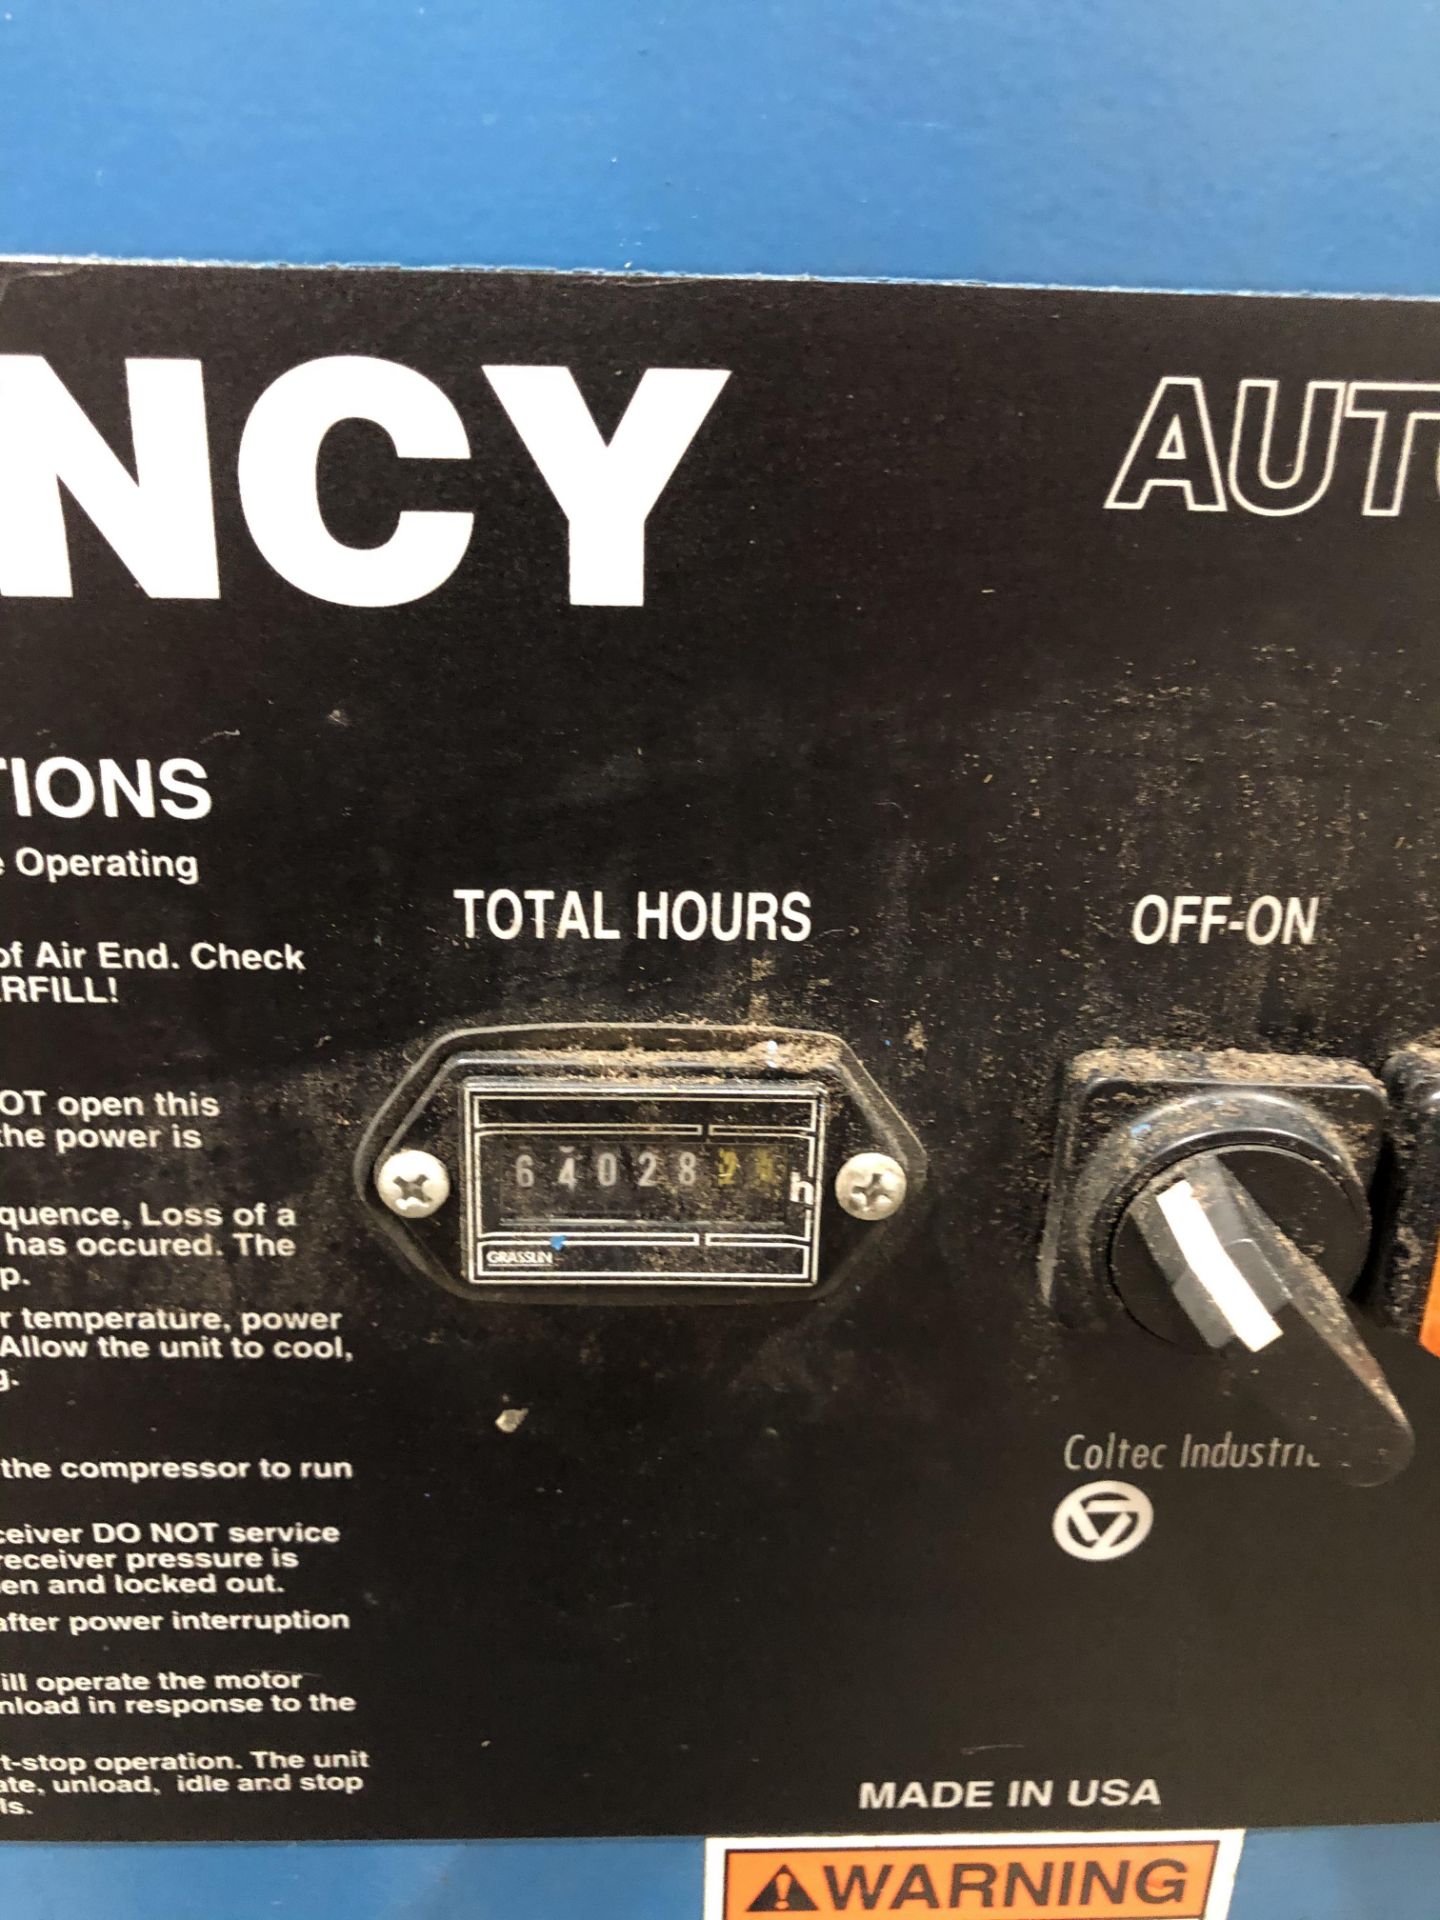 Quincy Air Compressor, 64,028.2 Hours, Rigging/ Loading Fee: $100 - Image 3 of 6